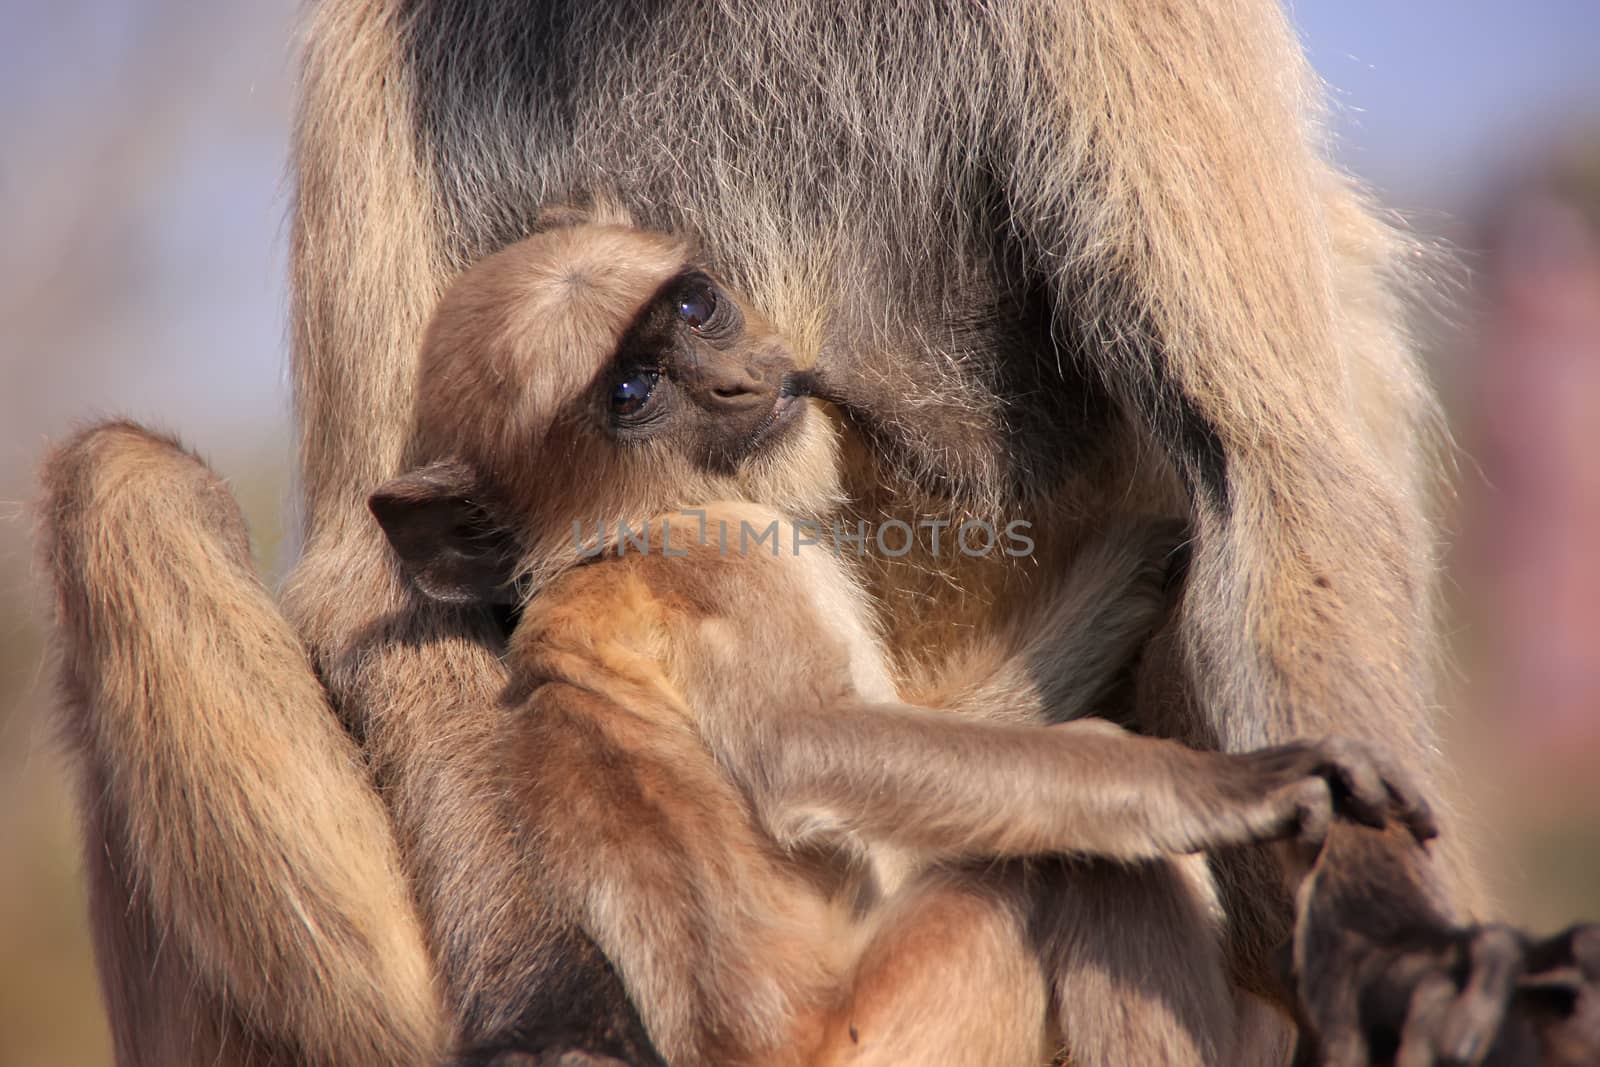 Baby Gray langur (Semnopithecus dussumieri) resting in mothers arms, Ranthambore Fort, Rajasthan, India